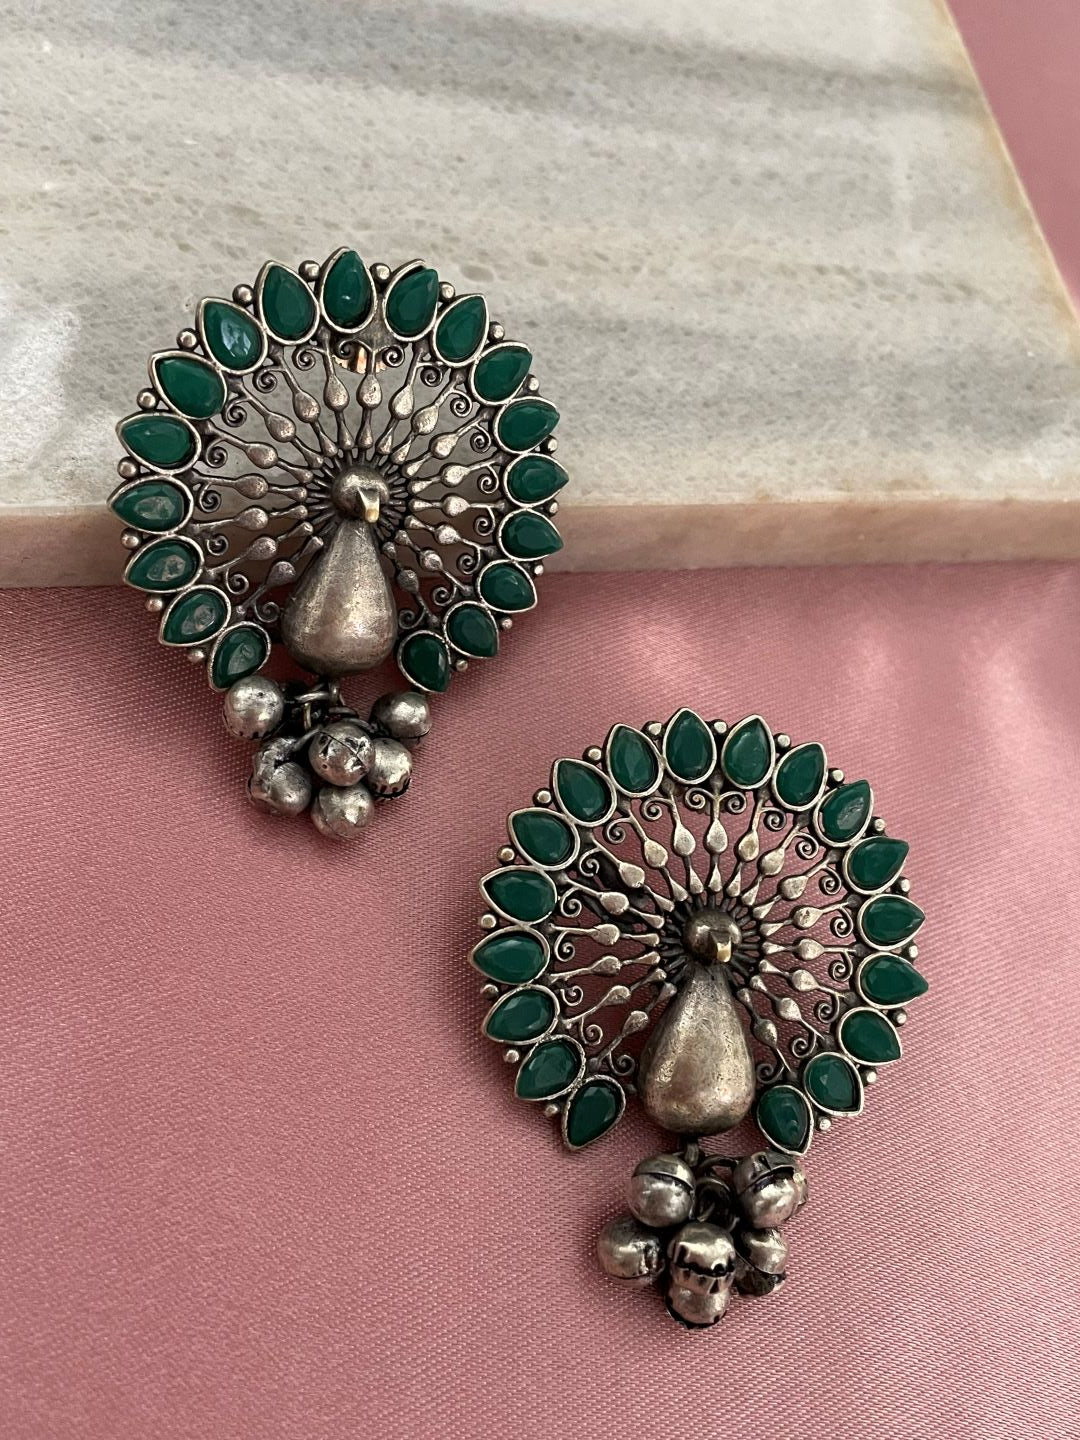 image for German Oxidized Silver Stud Earrings Peacock Design With Green Stones and Silver Bells